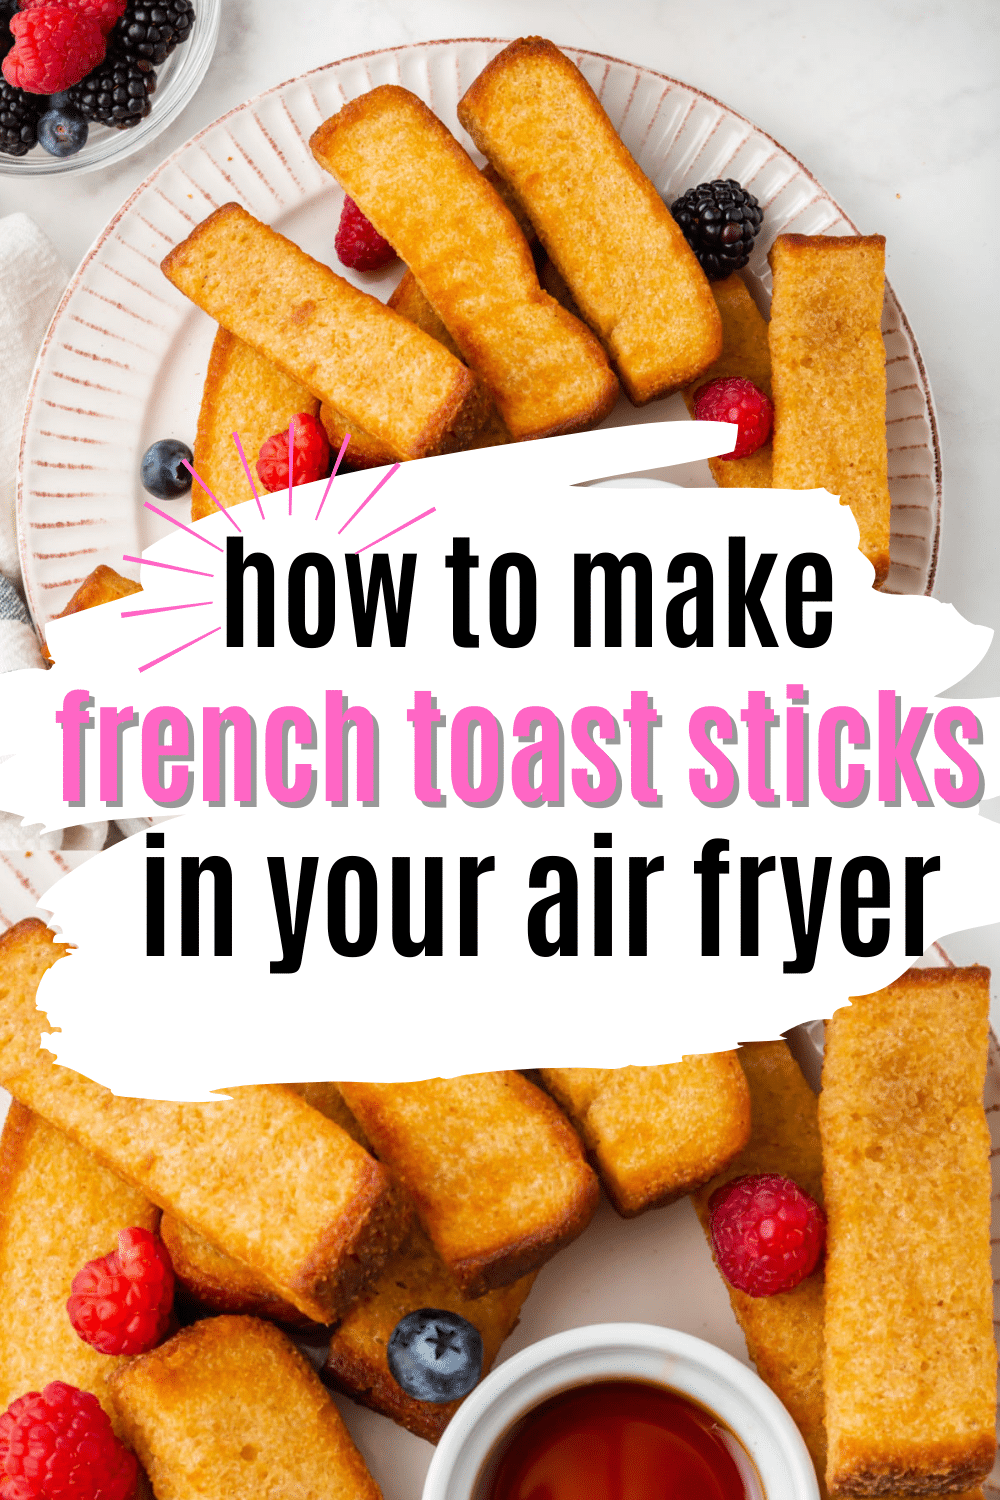 Breakfast time is going to get a whole lot easier when you starting making Frozen French Toast Sticks in Air Fryer! Let your air fryer do the work, while you sip your morning coffee! | air fryer breakfast | frozen foods in air fryer | French toast in air fryer